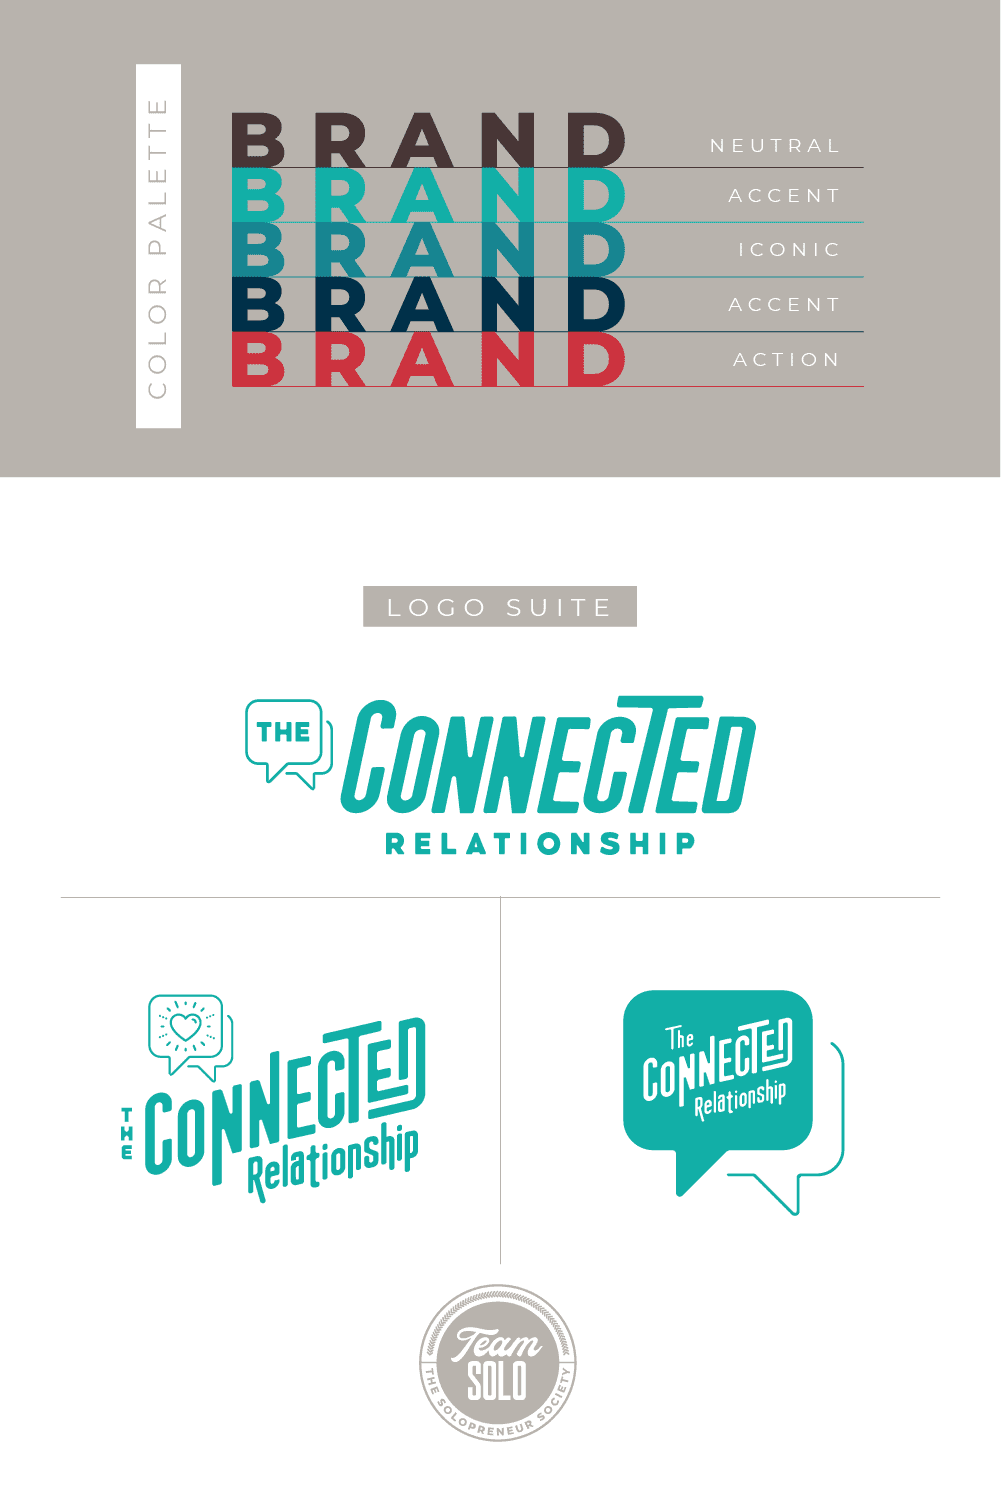 The Connected Relationship Brand Identity Design